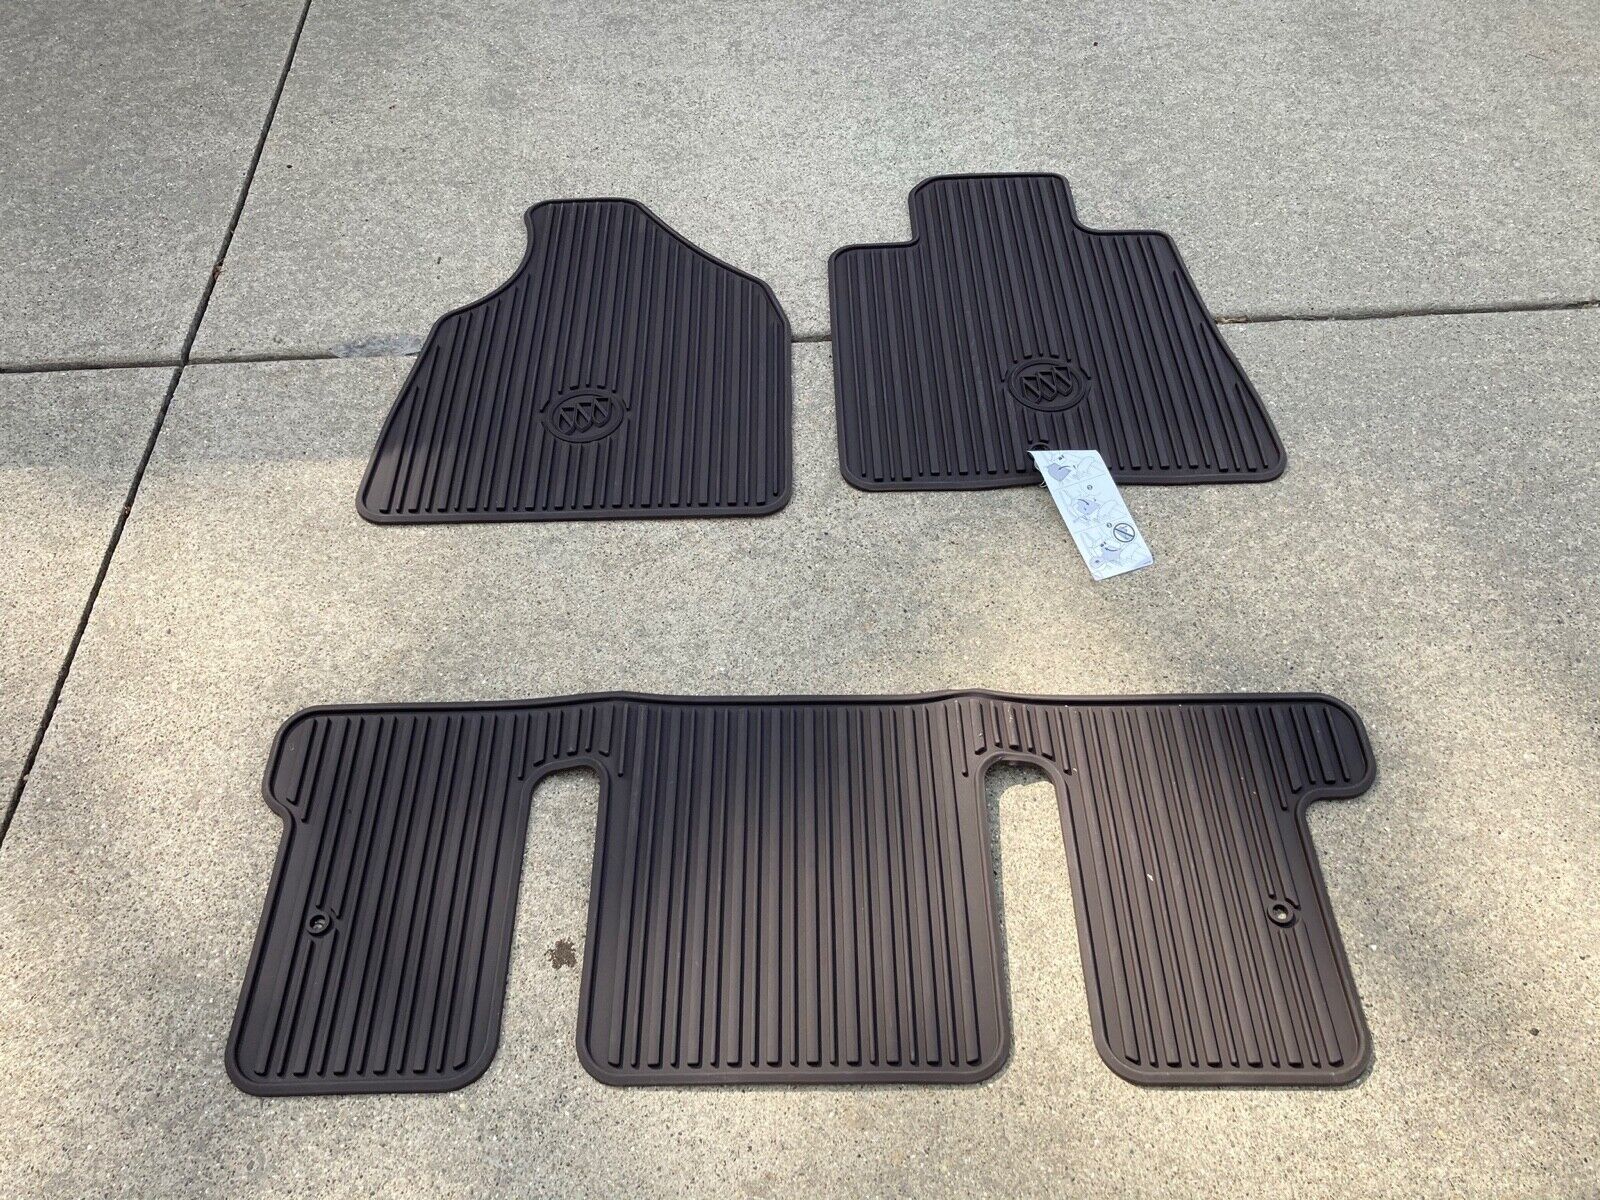 NEW Genuine OEM Buick Enclave GM All Weather Floor Mats 1st & 2nd Row BROWN GMC - $160.55